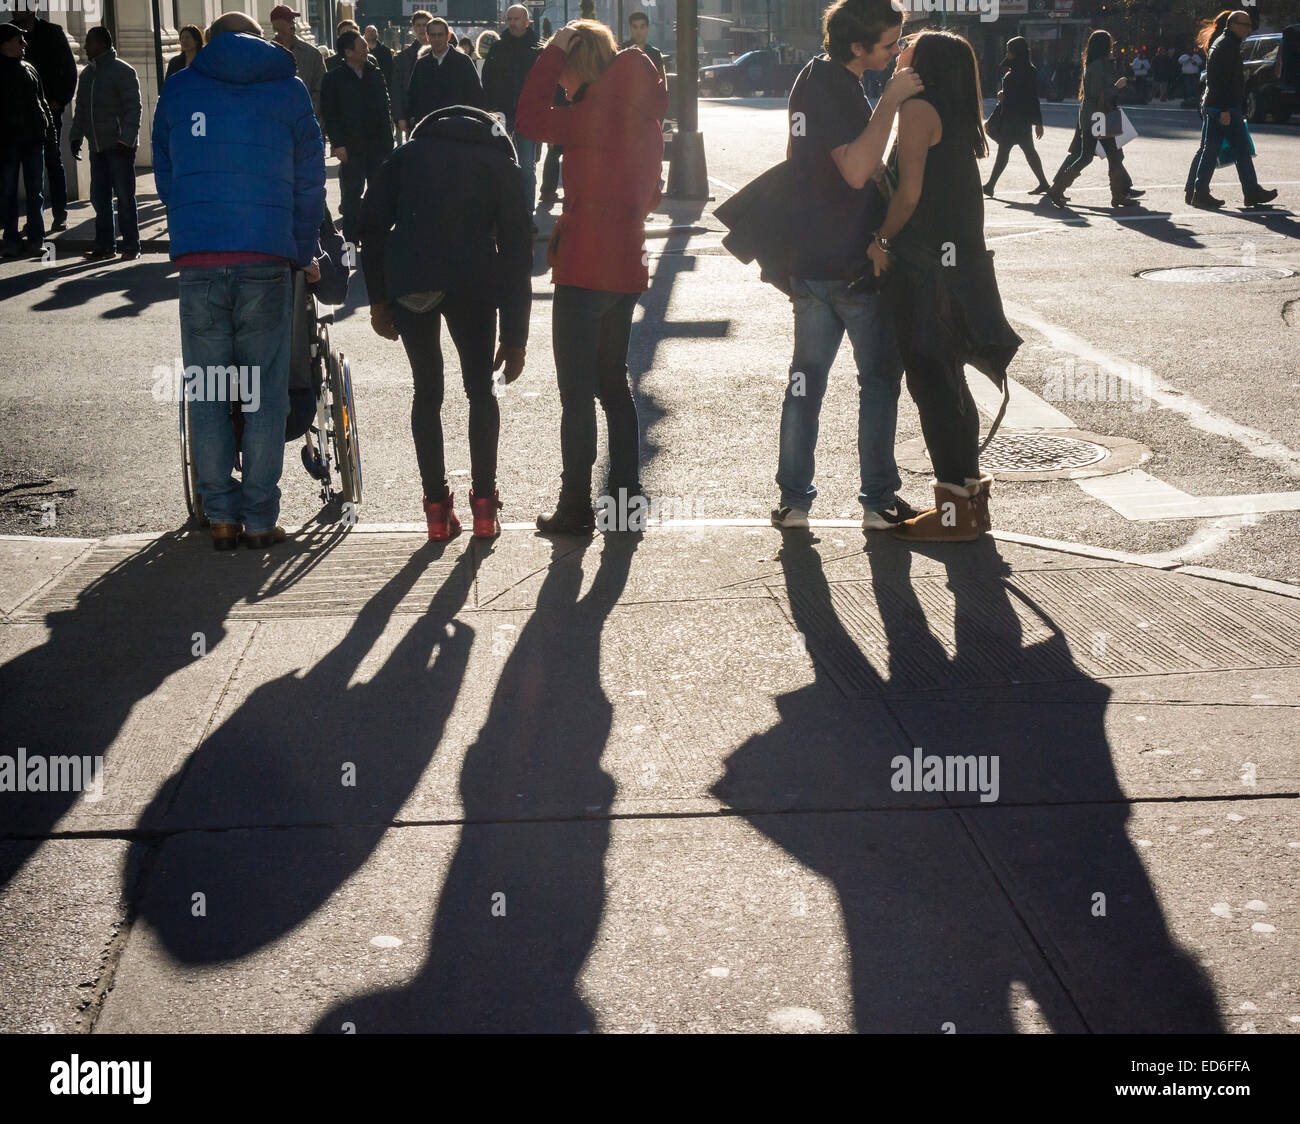 A public display of affection on Fifth Avenue in New York on the day after Christmas, Friday, December 26, 2014. (© Richard B. Levine) Stock Photo